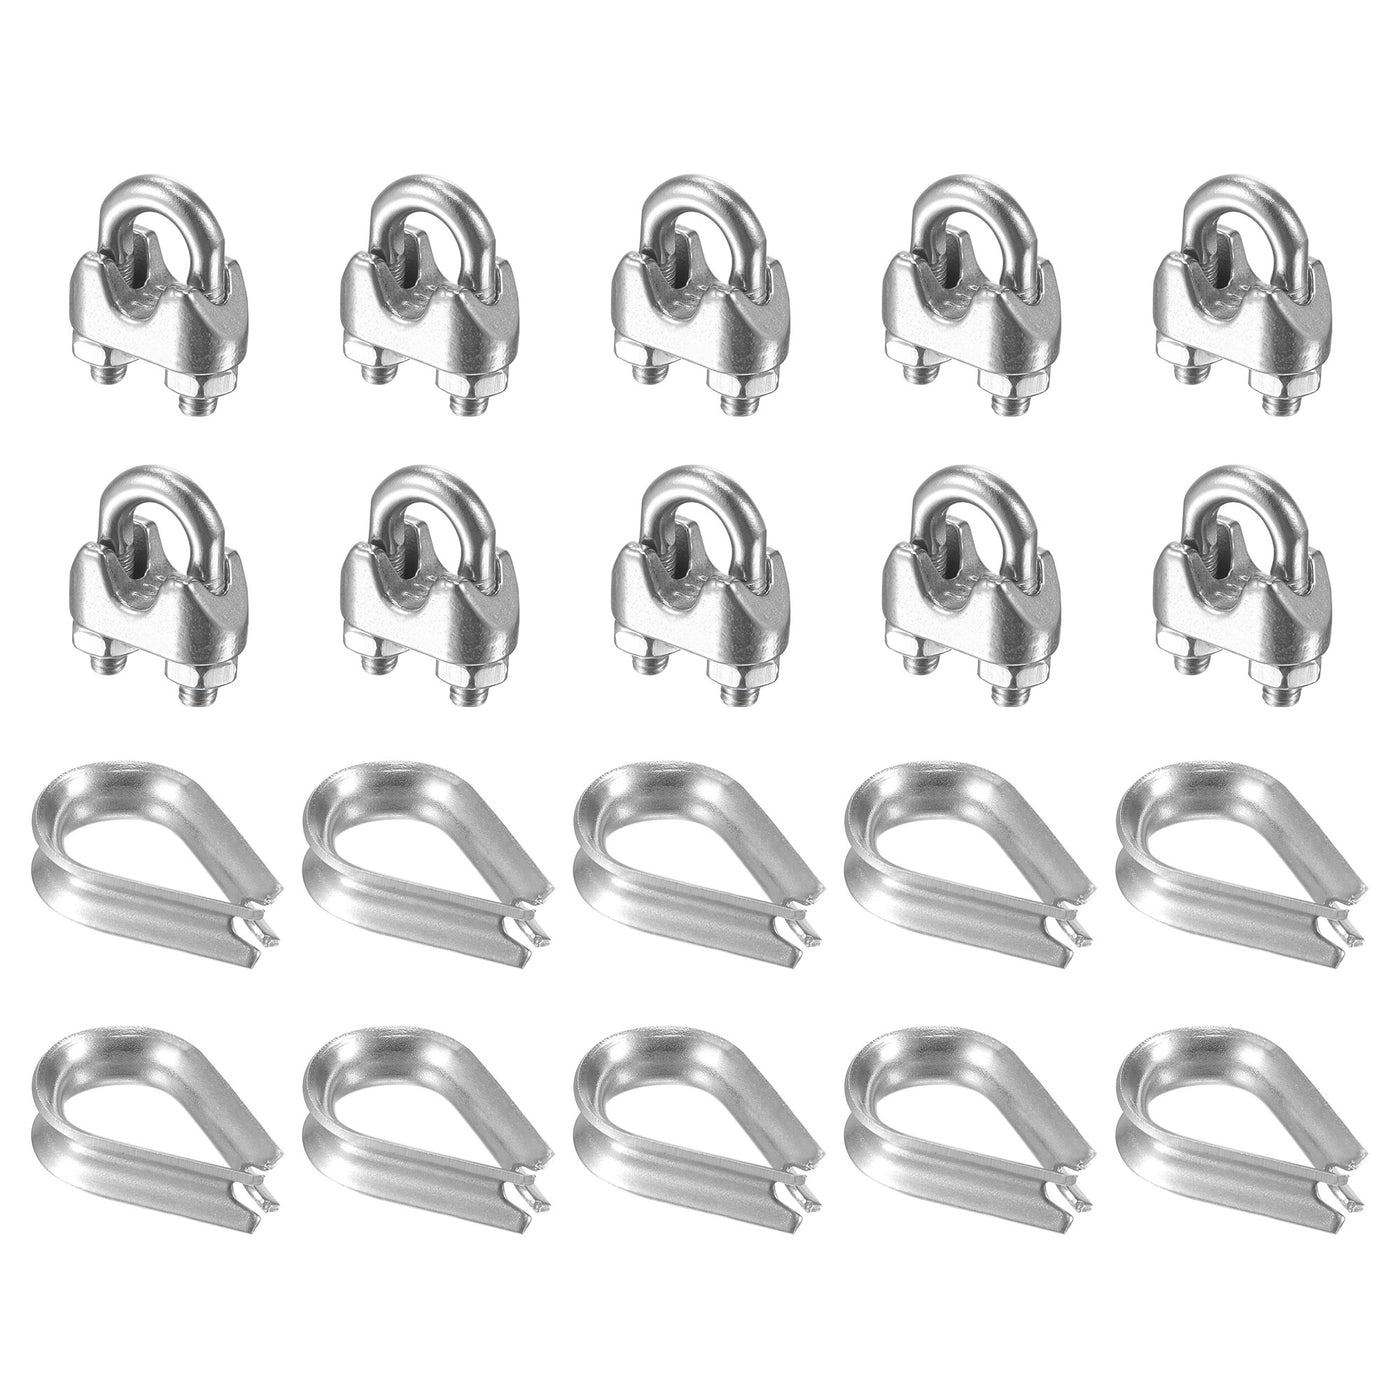 uxcell Uxcell Wire Rope Cable Clip Kit for M3, Included Rope Clamp 10Pcs and Thimble Rigging 10Pcs, 304 Stainless Steel U Bolt Saddle Fastener